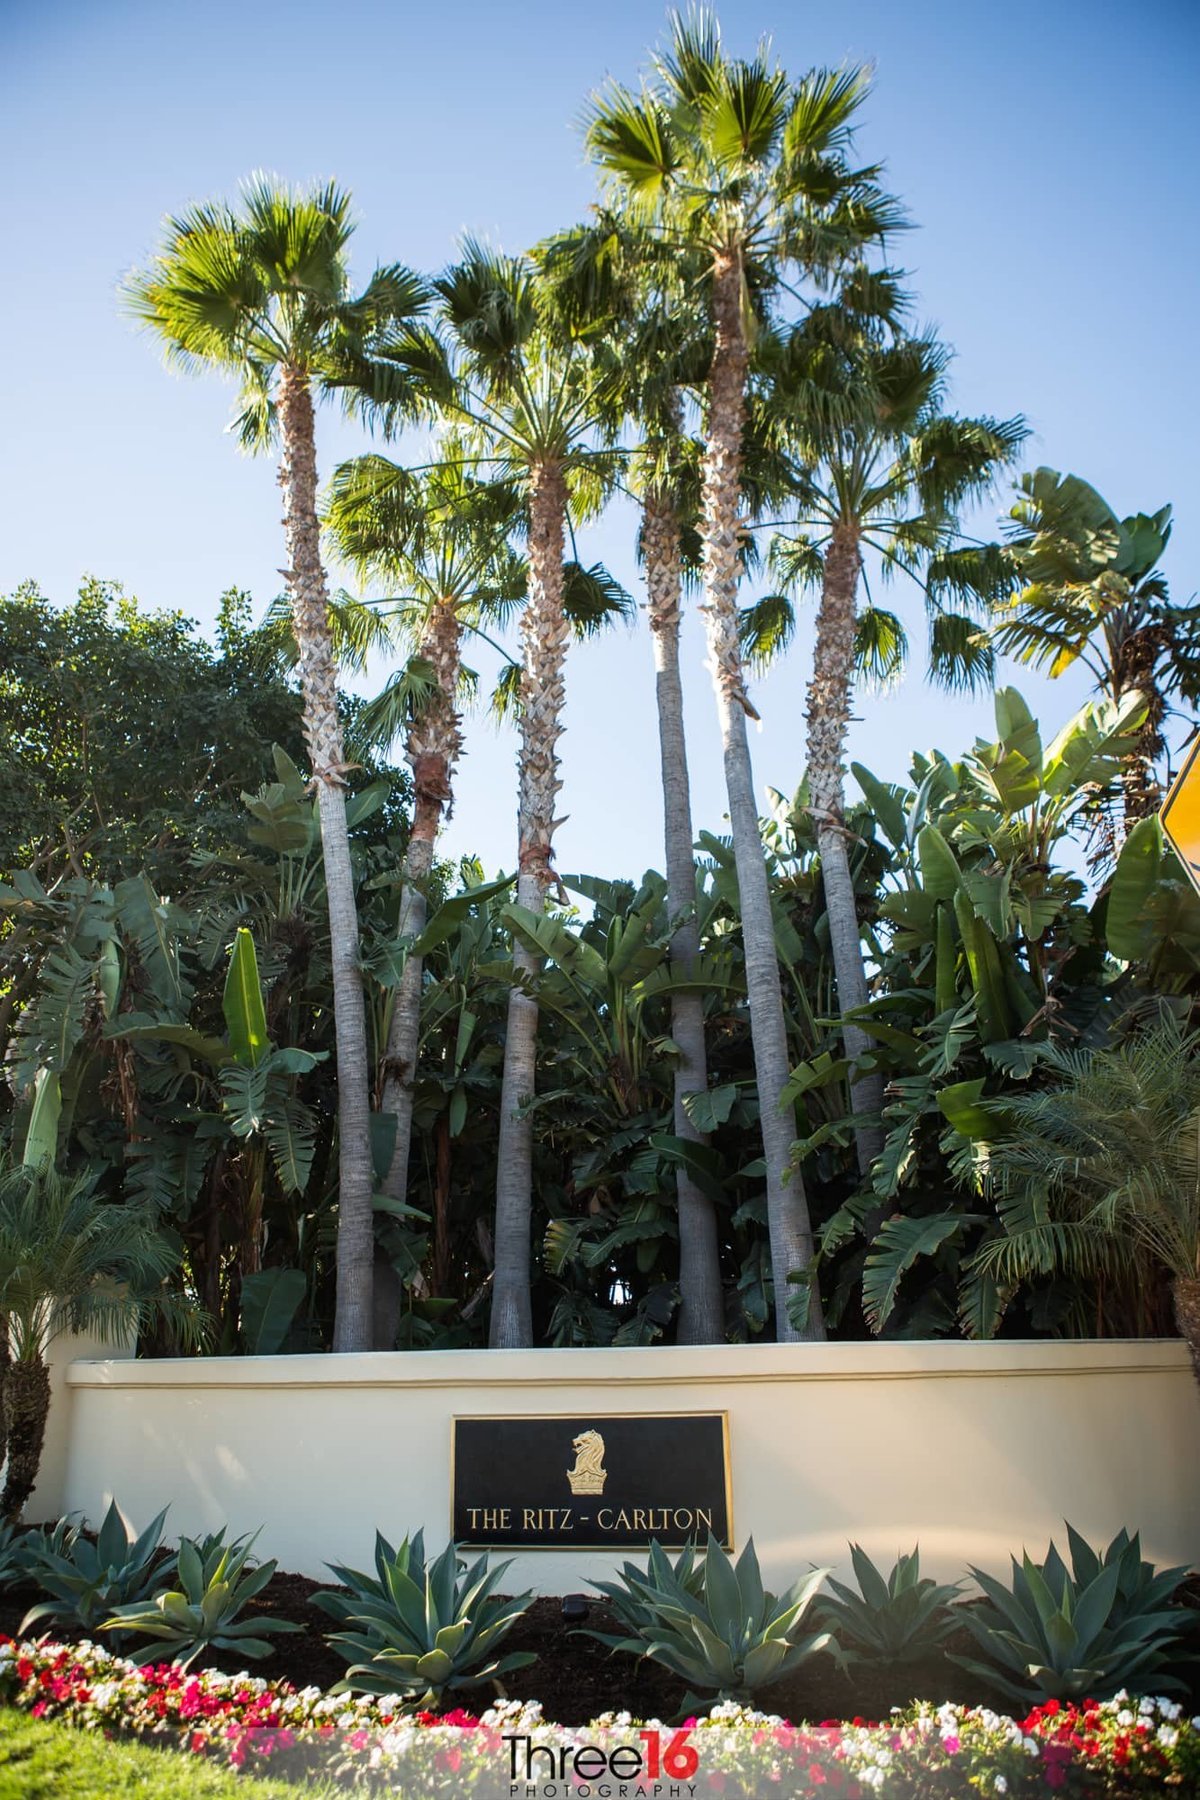 Amazing palm trees at the Ritz-Carlton in Dana Point